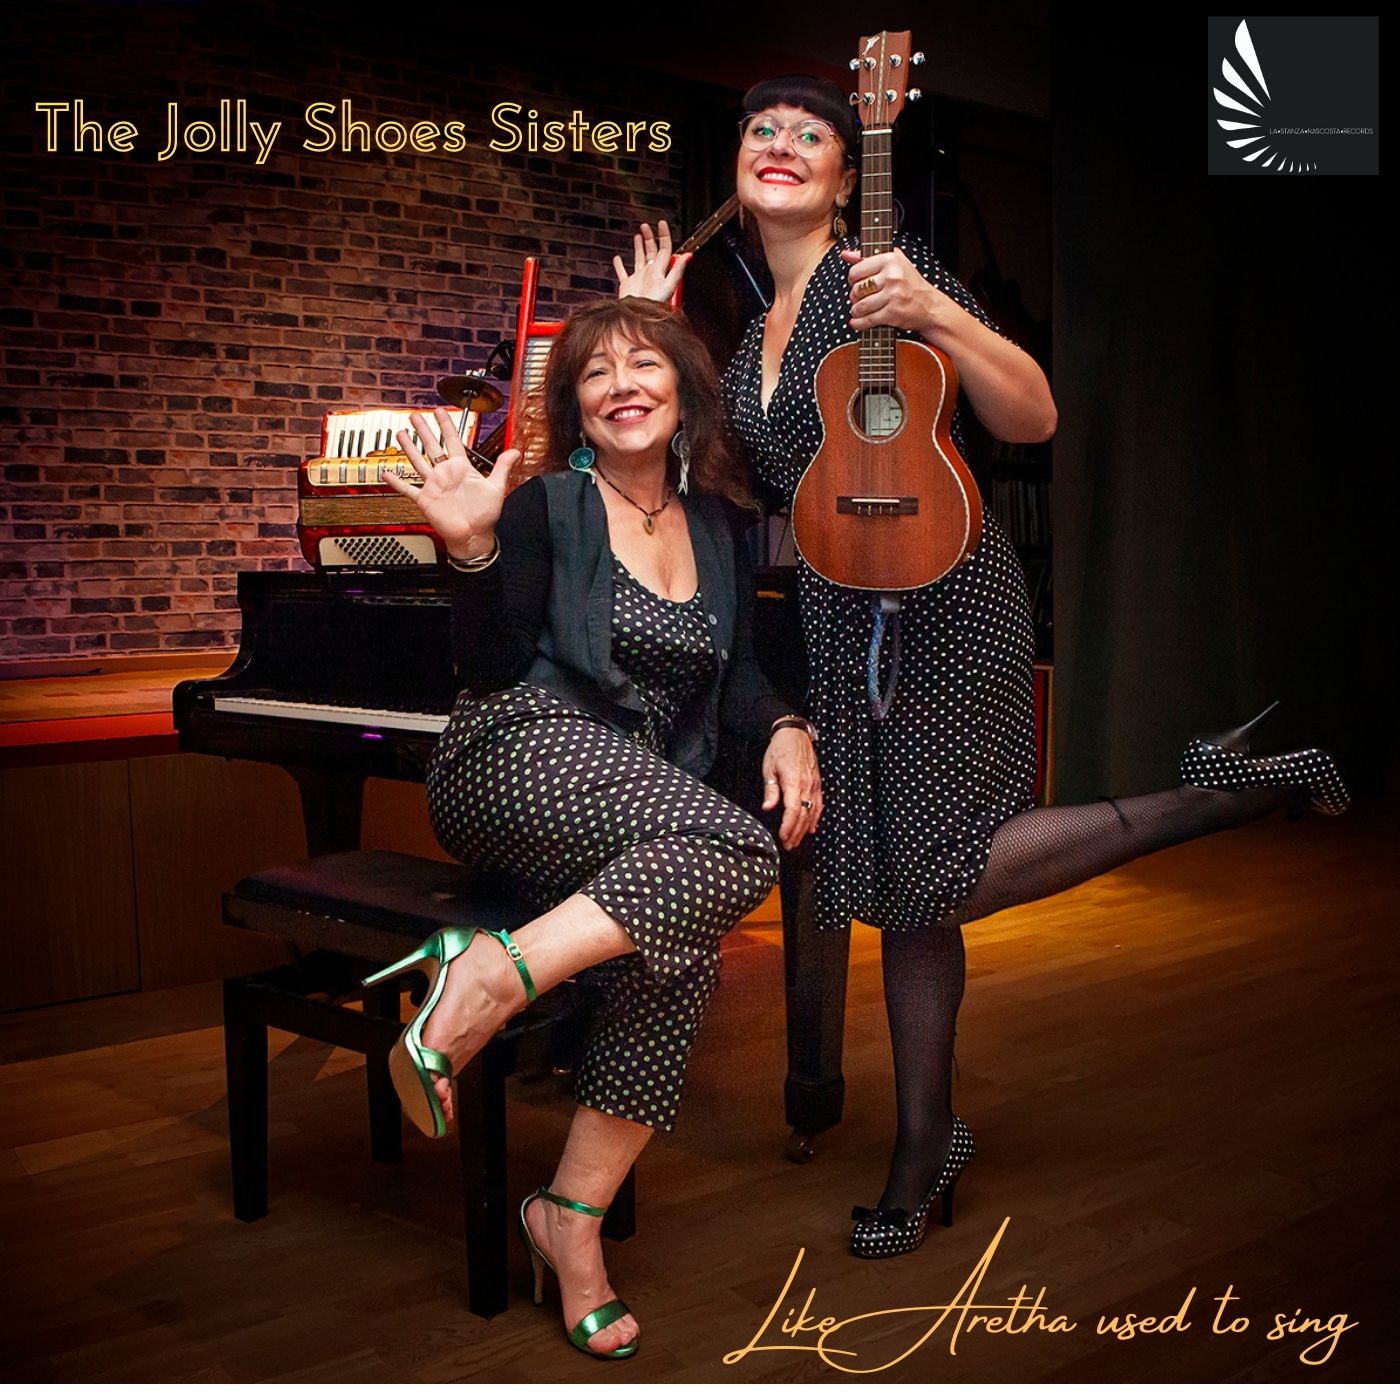 The Jolly Shoes Sisters feat Enrico Rava, fuori il nuovo singolo “Like Aretha used to sing”